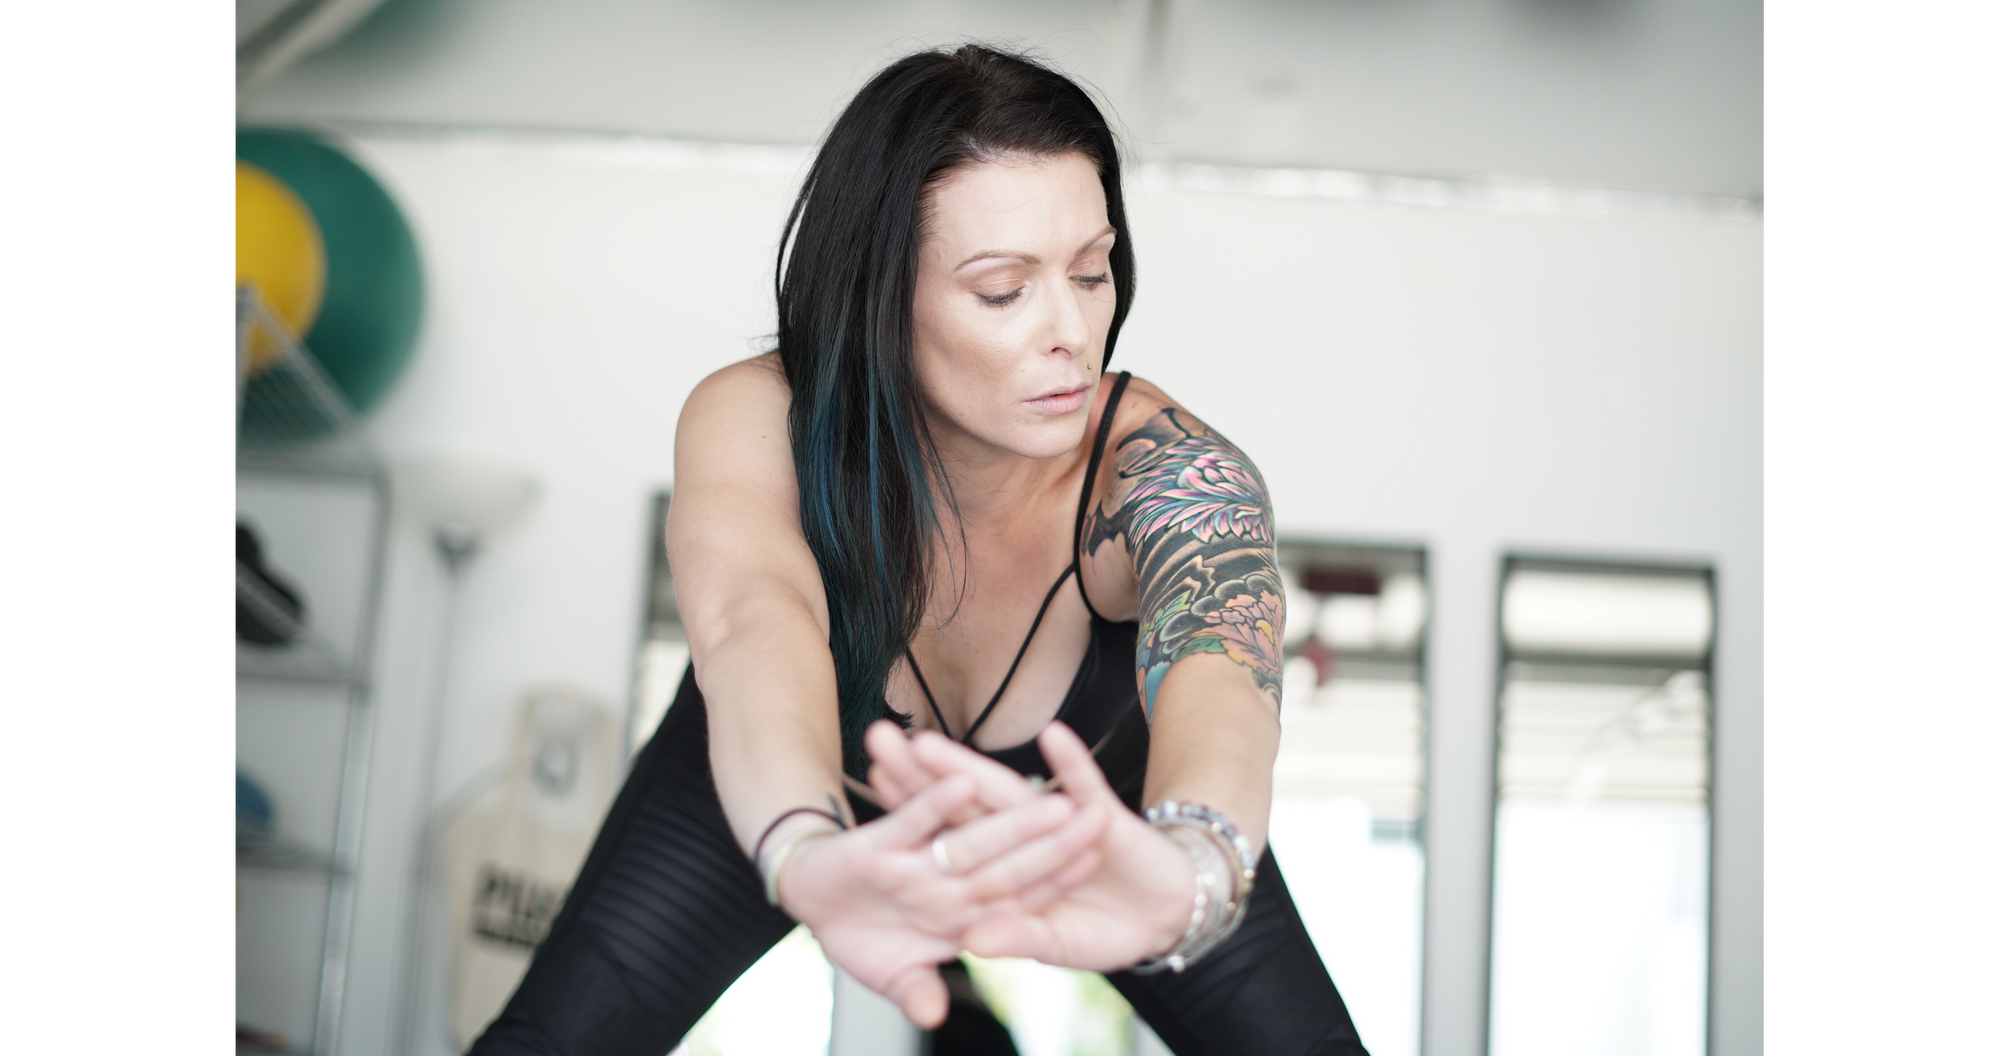 The Ultimate Pilates Experience - Pilates With Ashlee